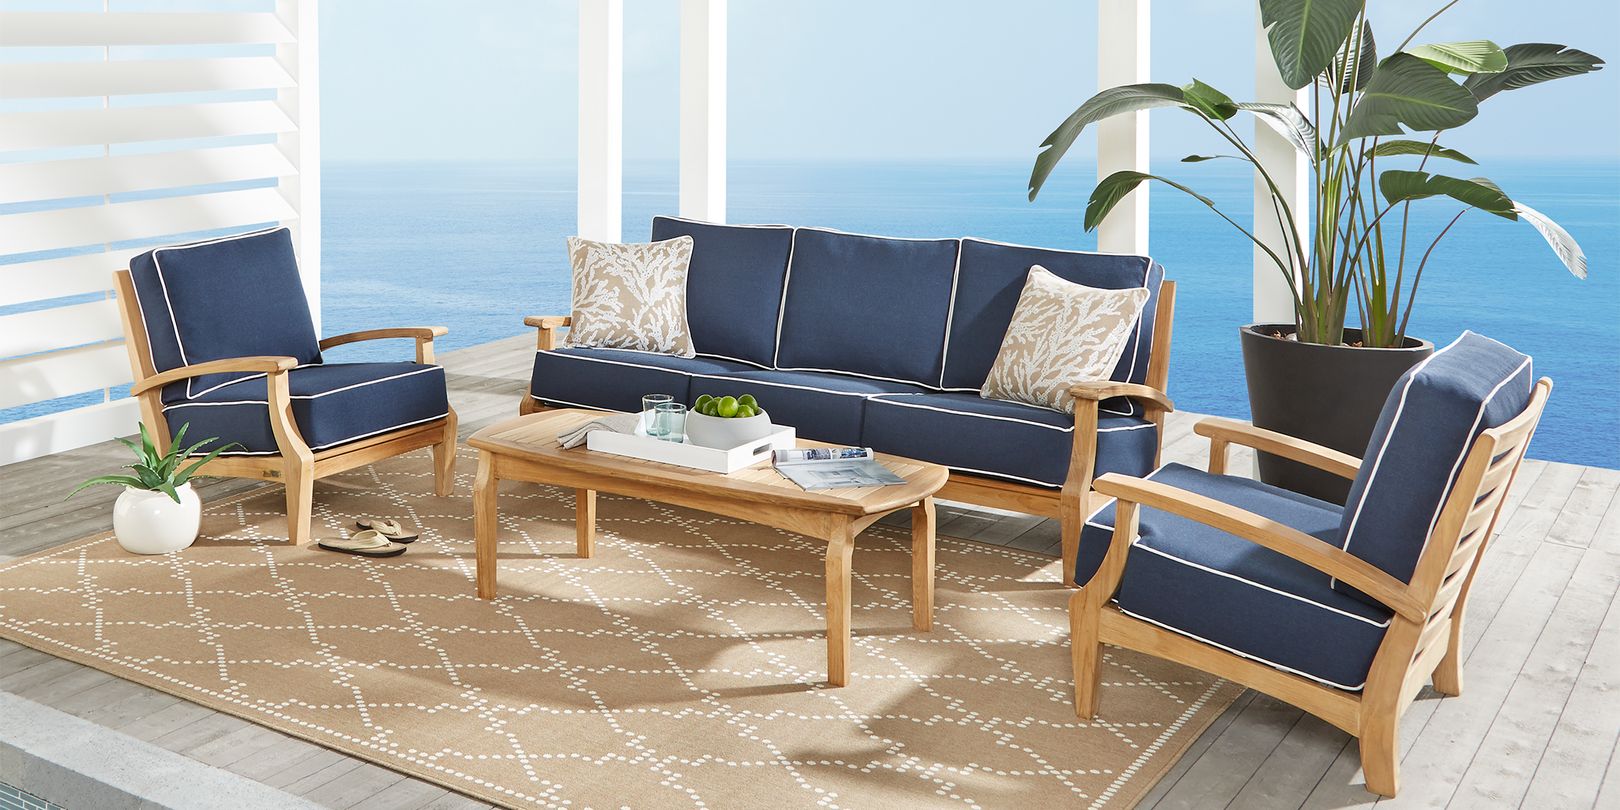 Photo of teak patio seating set with navy and denim cushions